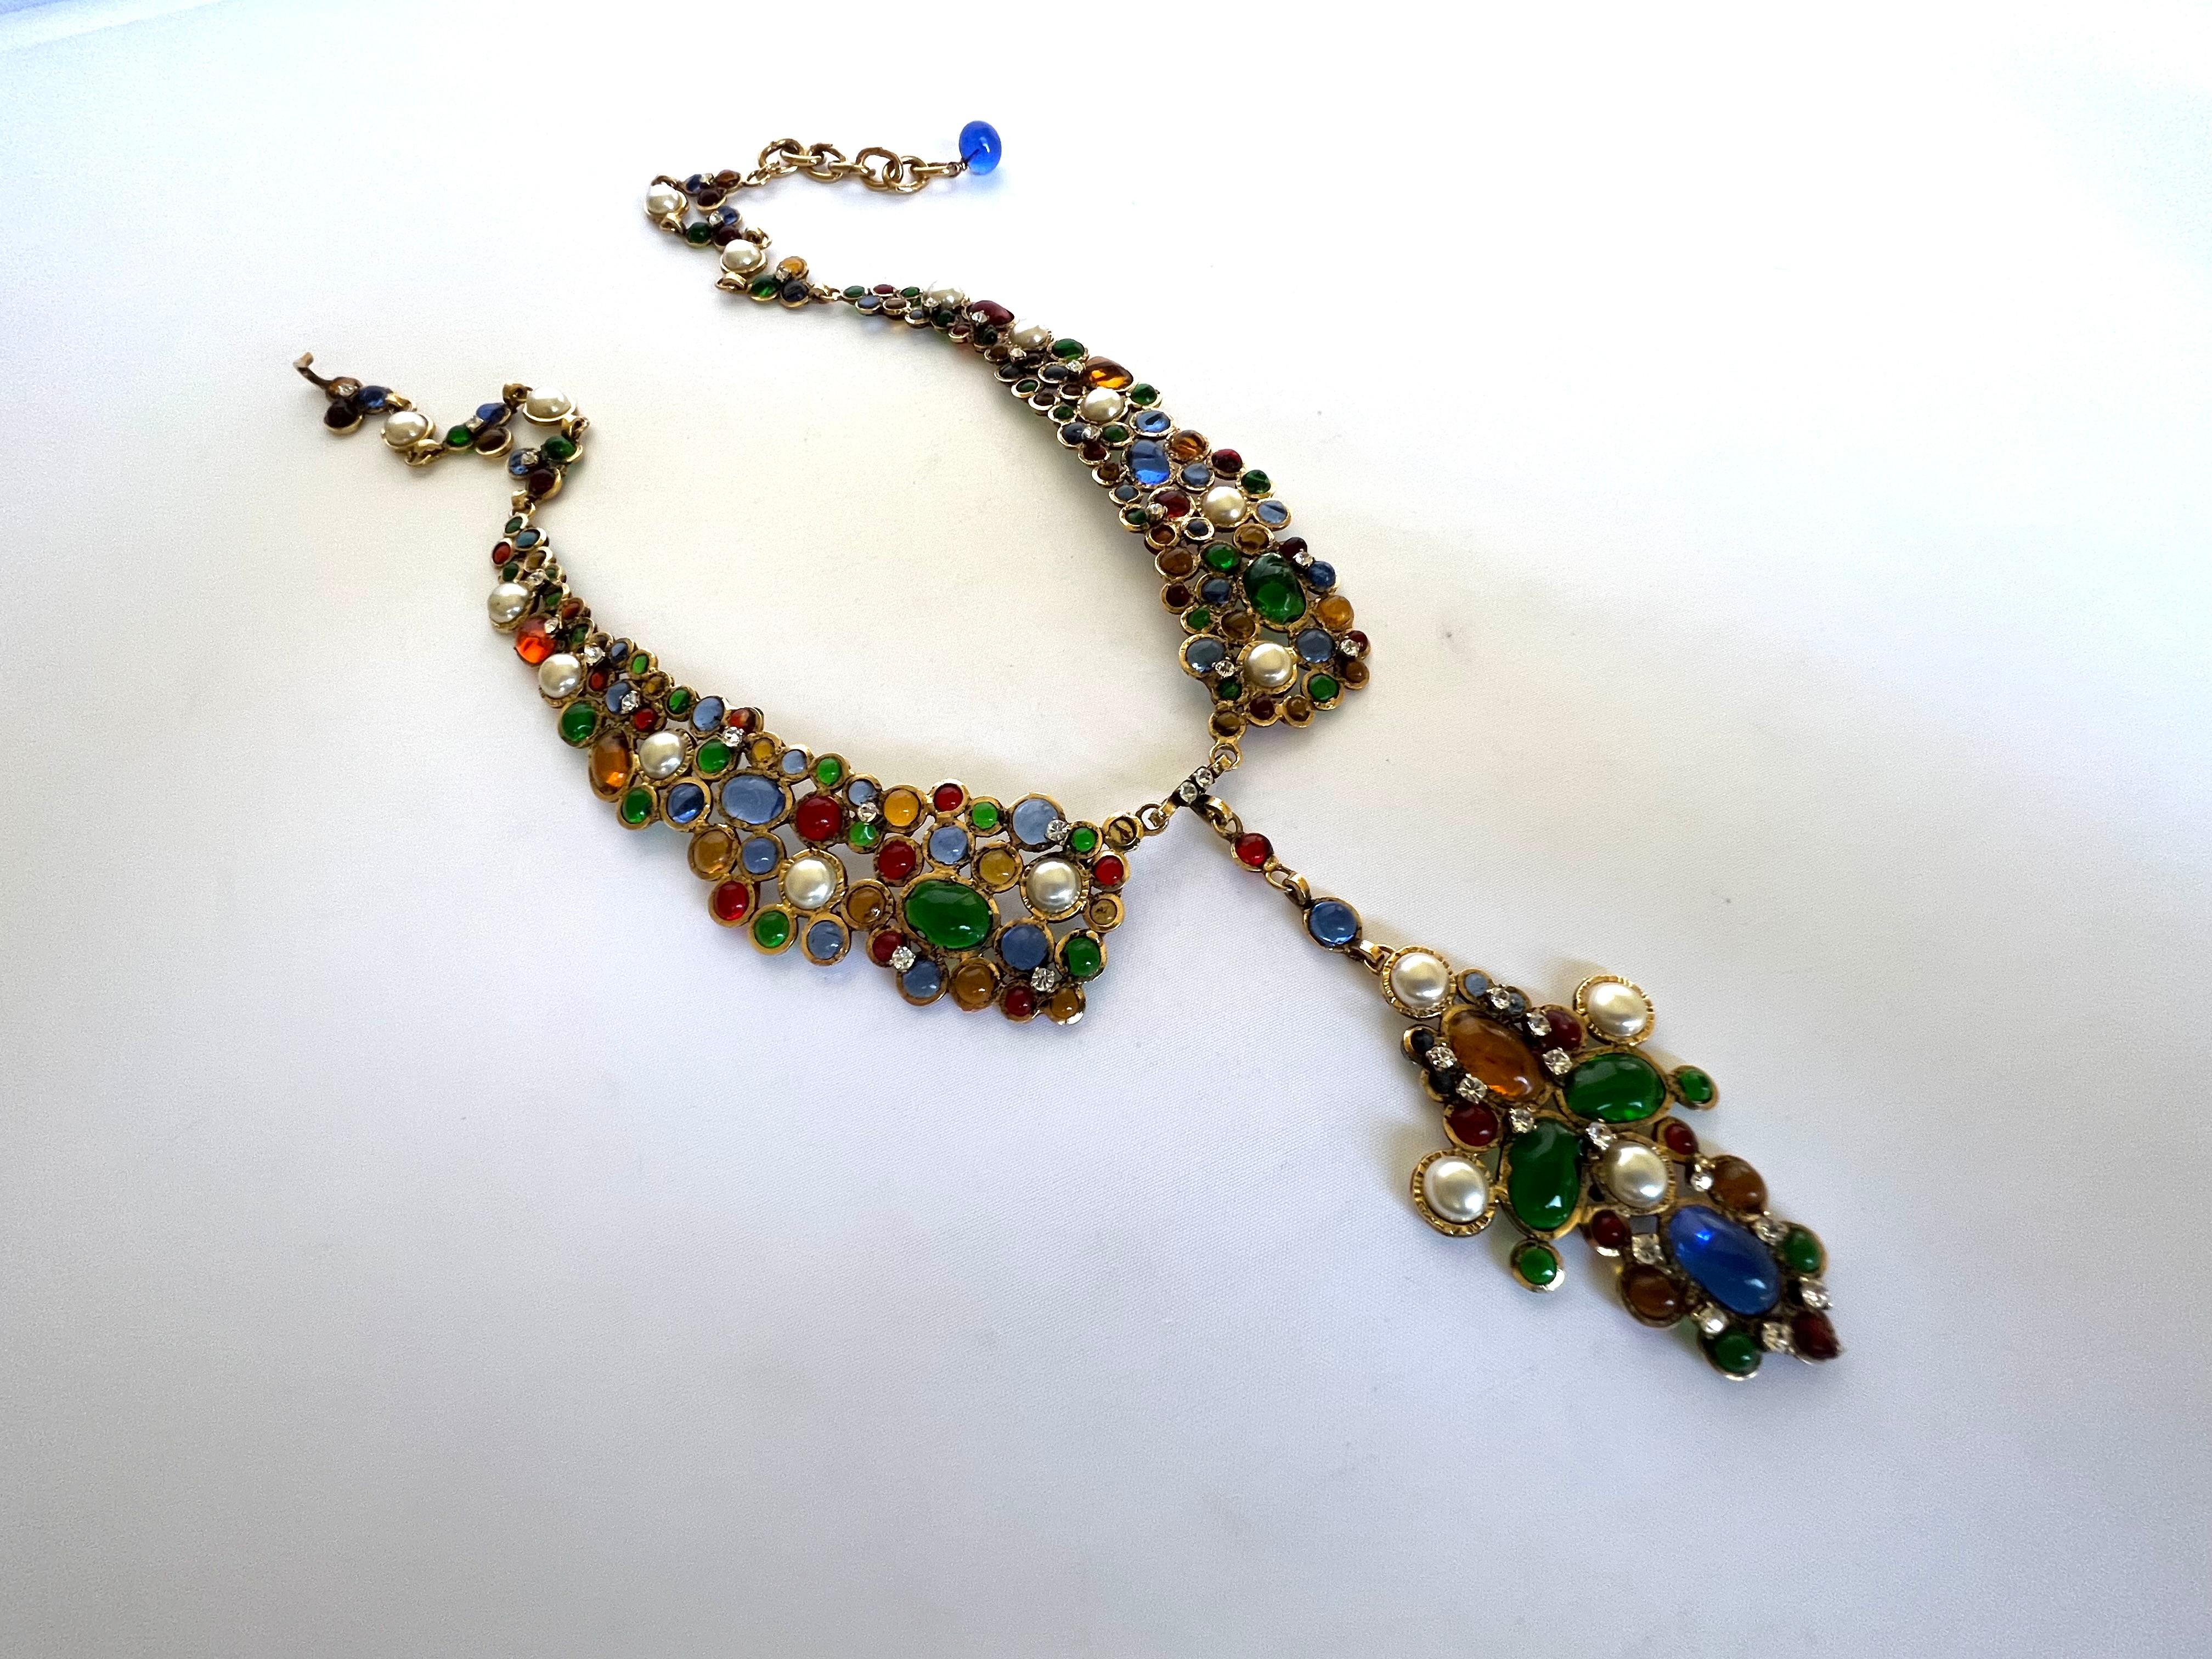 Highly scarce vintage Moghul style necklace by Maison Gripoix for Chanel. The necklace is adorned by colored pate de verre, crystal pastes, and large faux white pearls, entirely handmade by Maison Gripoix in Paris. Unfortunately, this quality in a